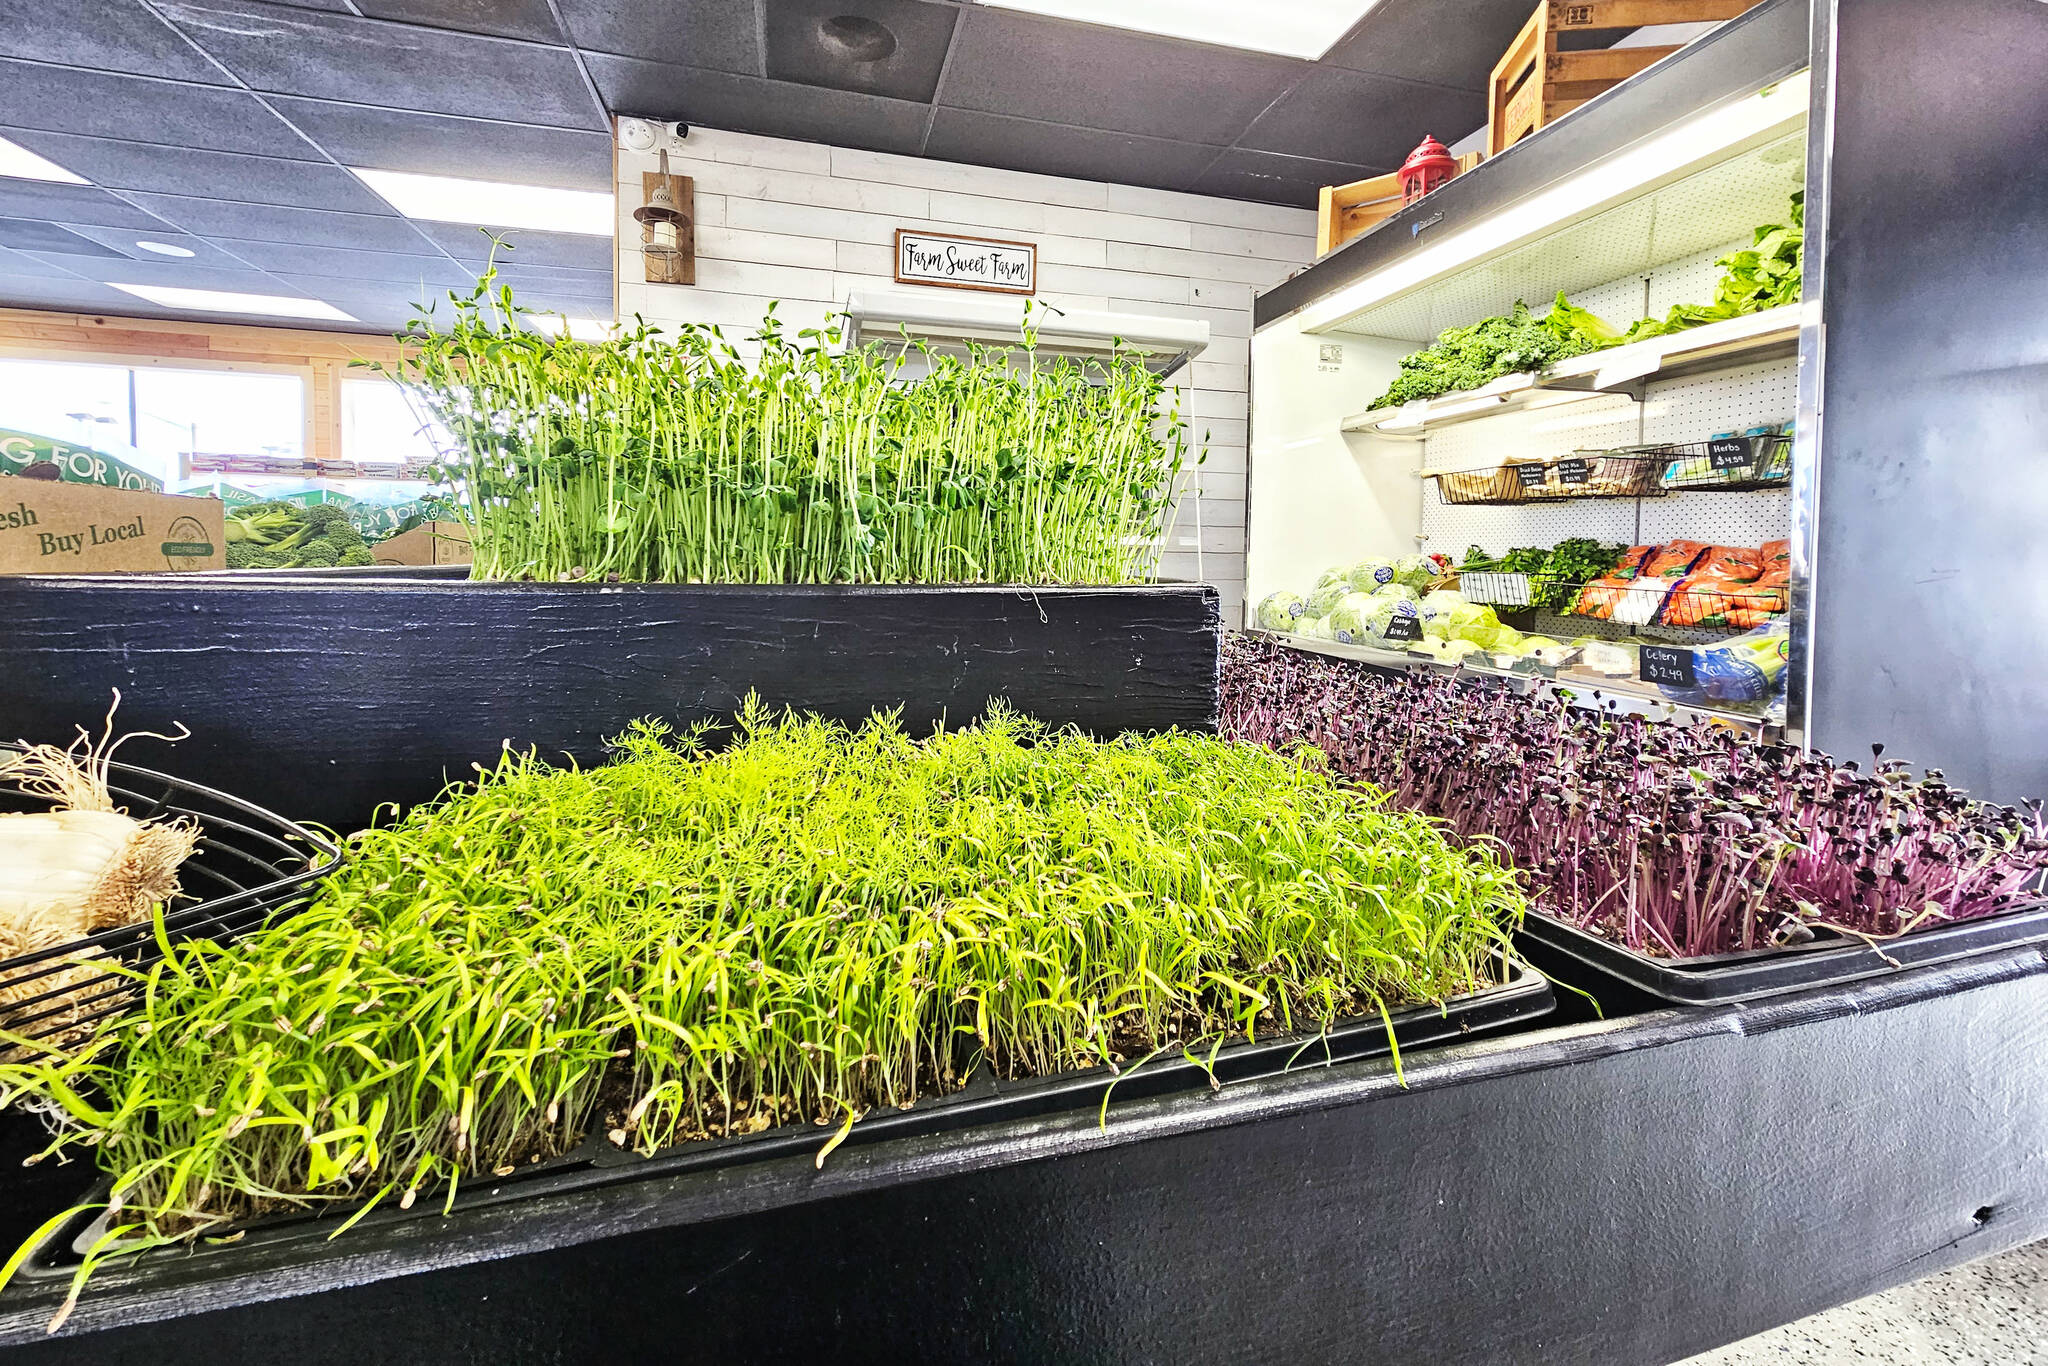 Rainier Fresh Country Store partners with numerous local farmers and producers, including Mom’s Microgreens, which is owned by store owner Patrick. Photo by Ray Miller-Still